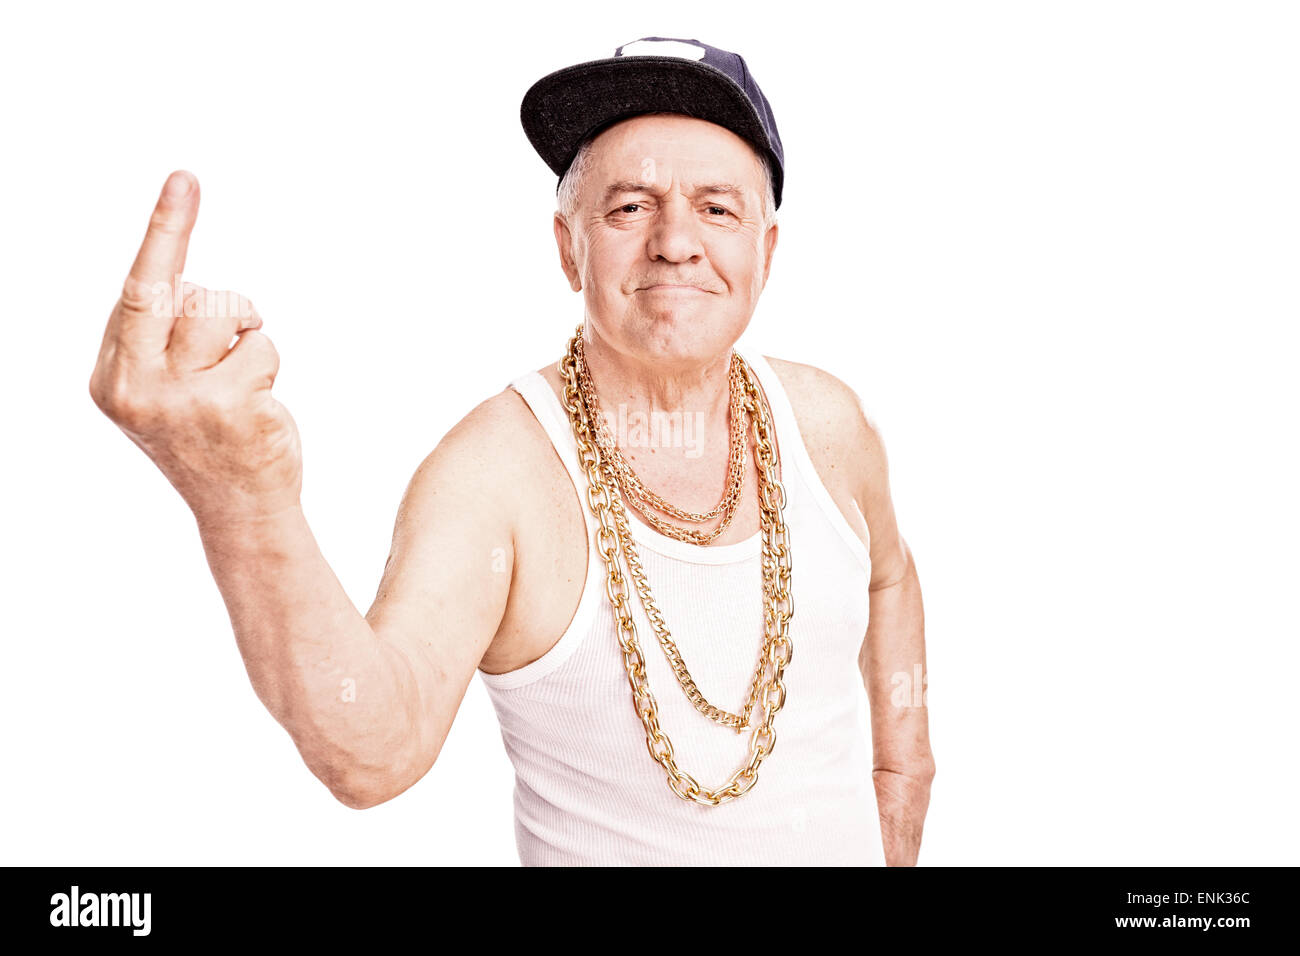 Senior man with a hip-hop cap and a golden chain, giving the finger and looking at the camera isolated on white background Stock Photo